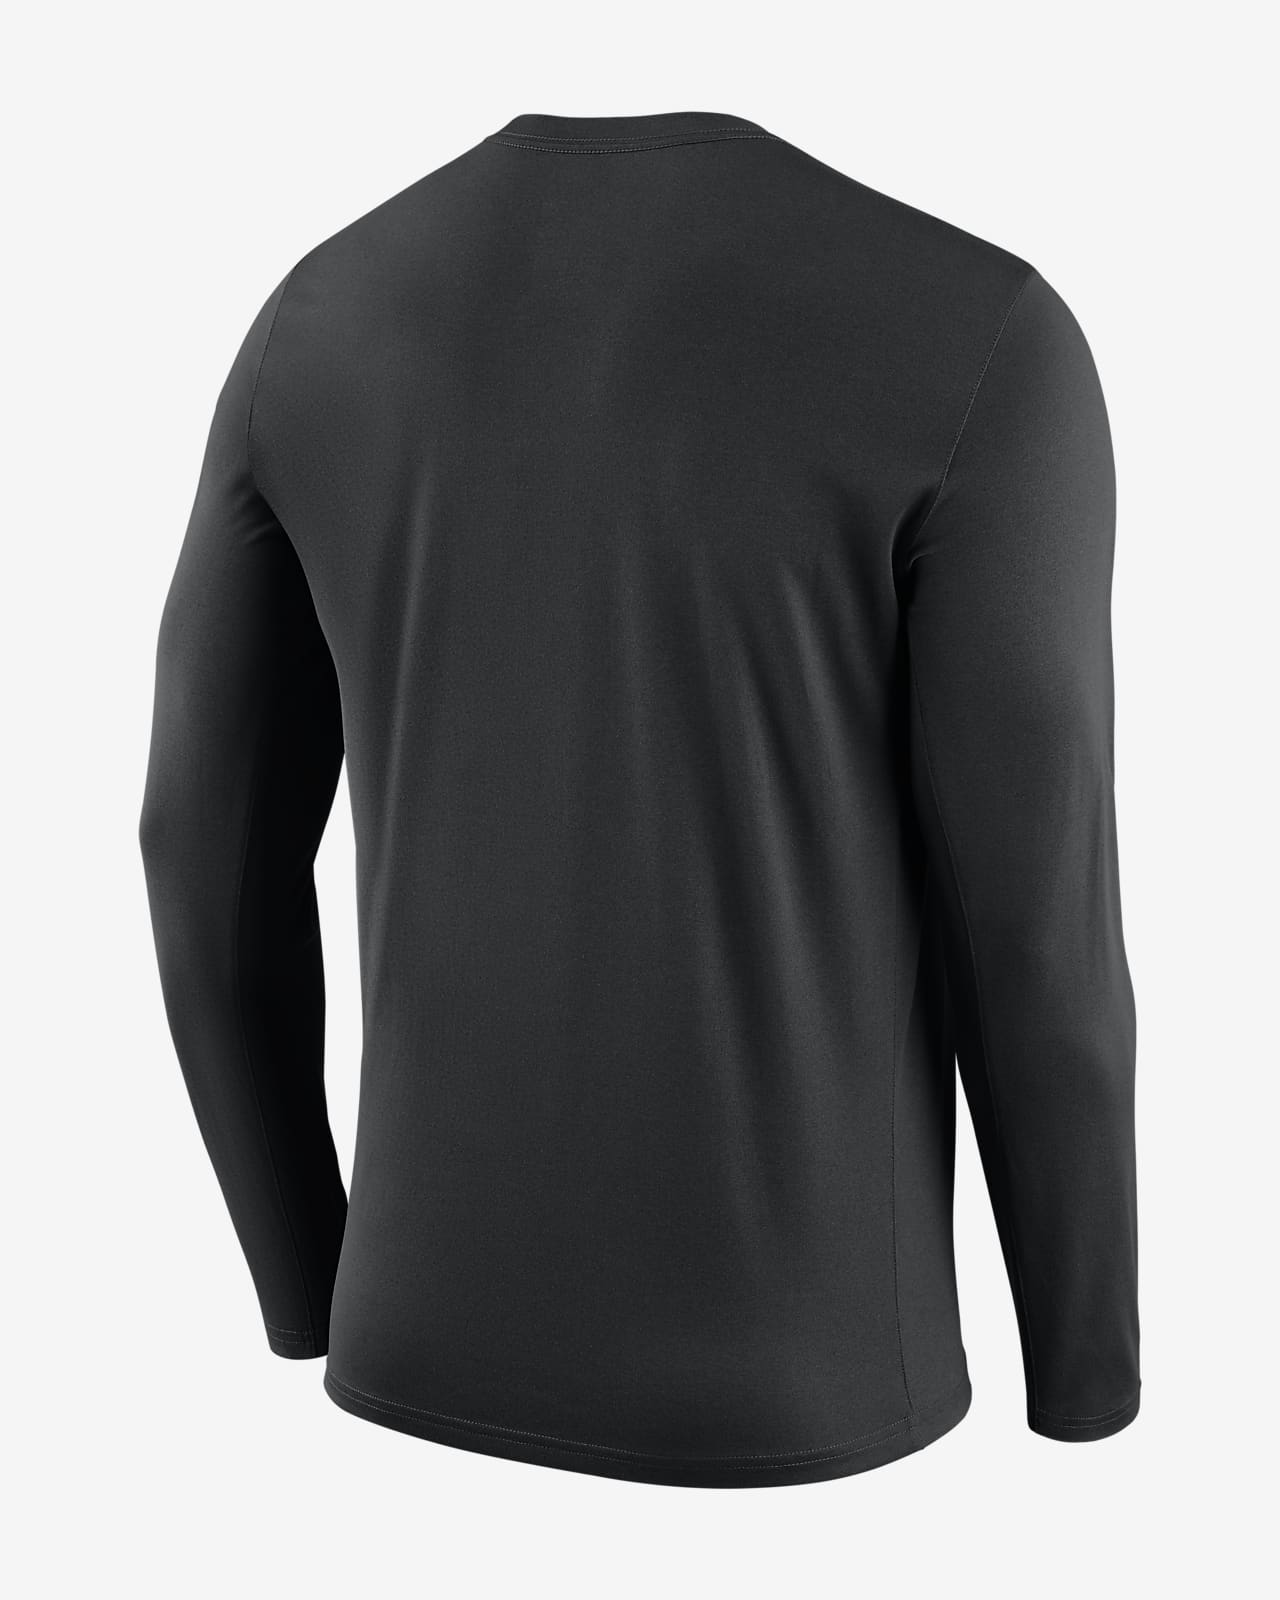 dry fit long sleeve